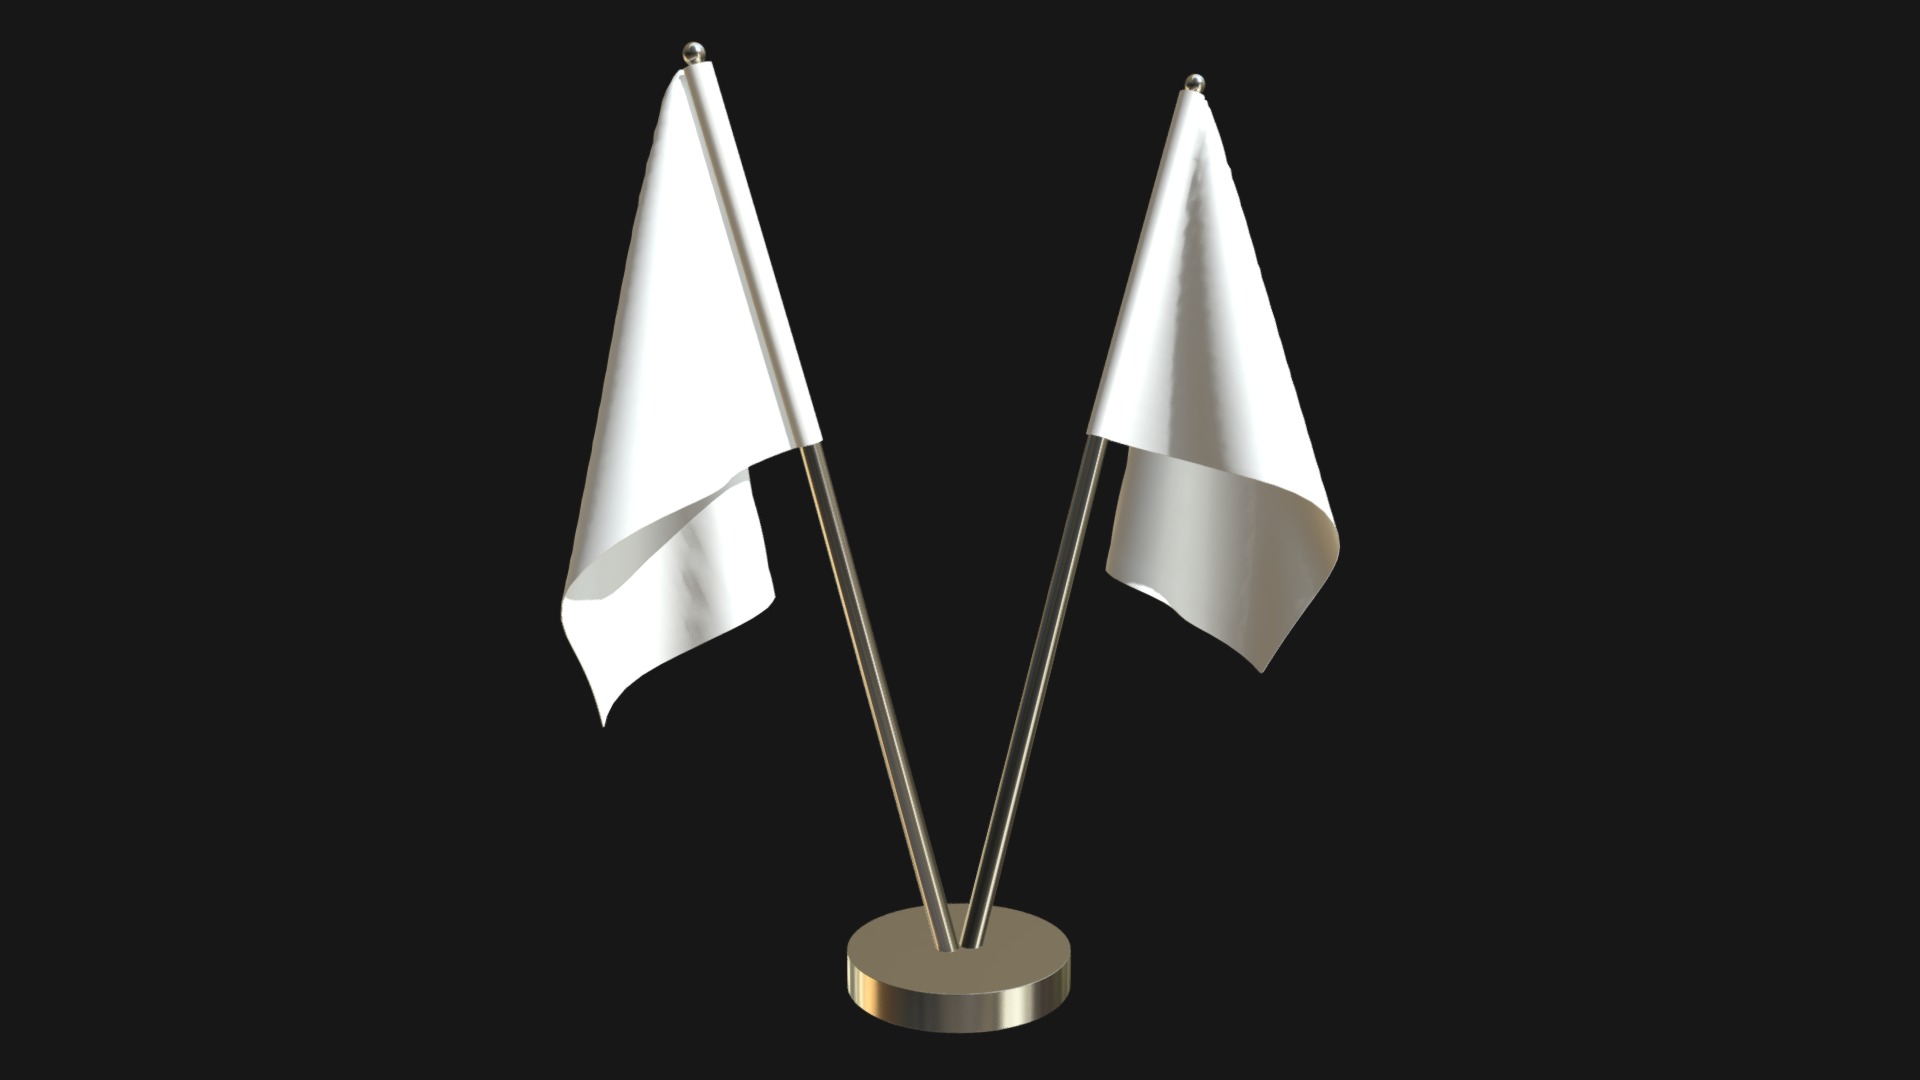 3D model Table top flags with stand - This is a 3D model of the Table top flags with stand. The 3D model is about a couple of white lamps.